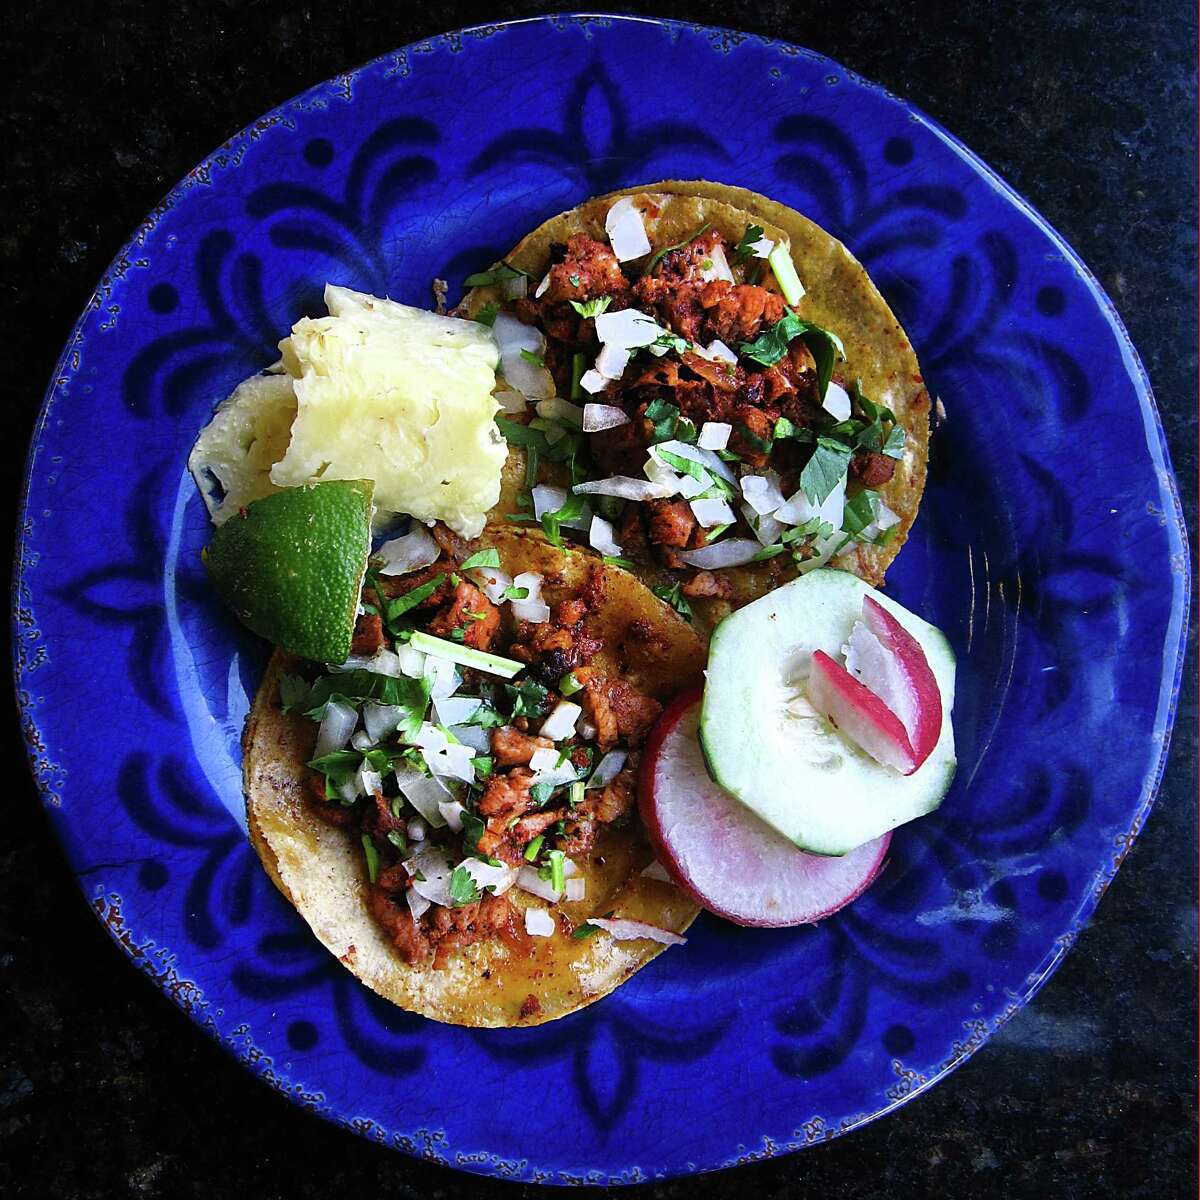 Taco of the Week: Al pastor tacos with pineapple, lime, radishes, cucumber, cilantro and onions from Taquitos West Ave.